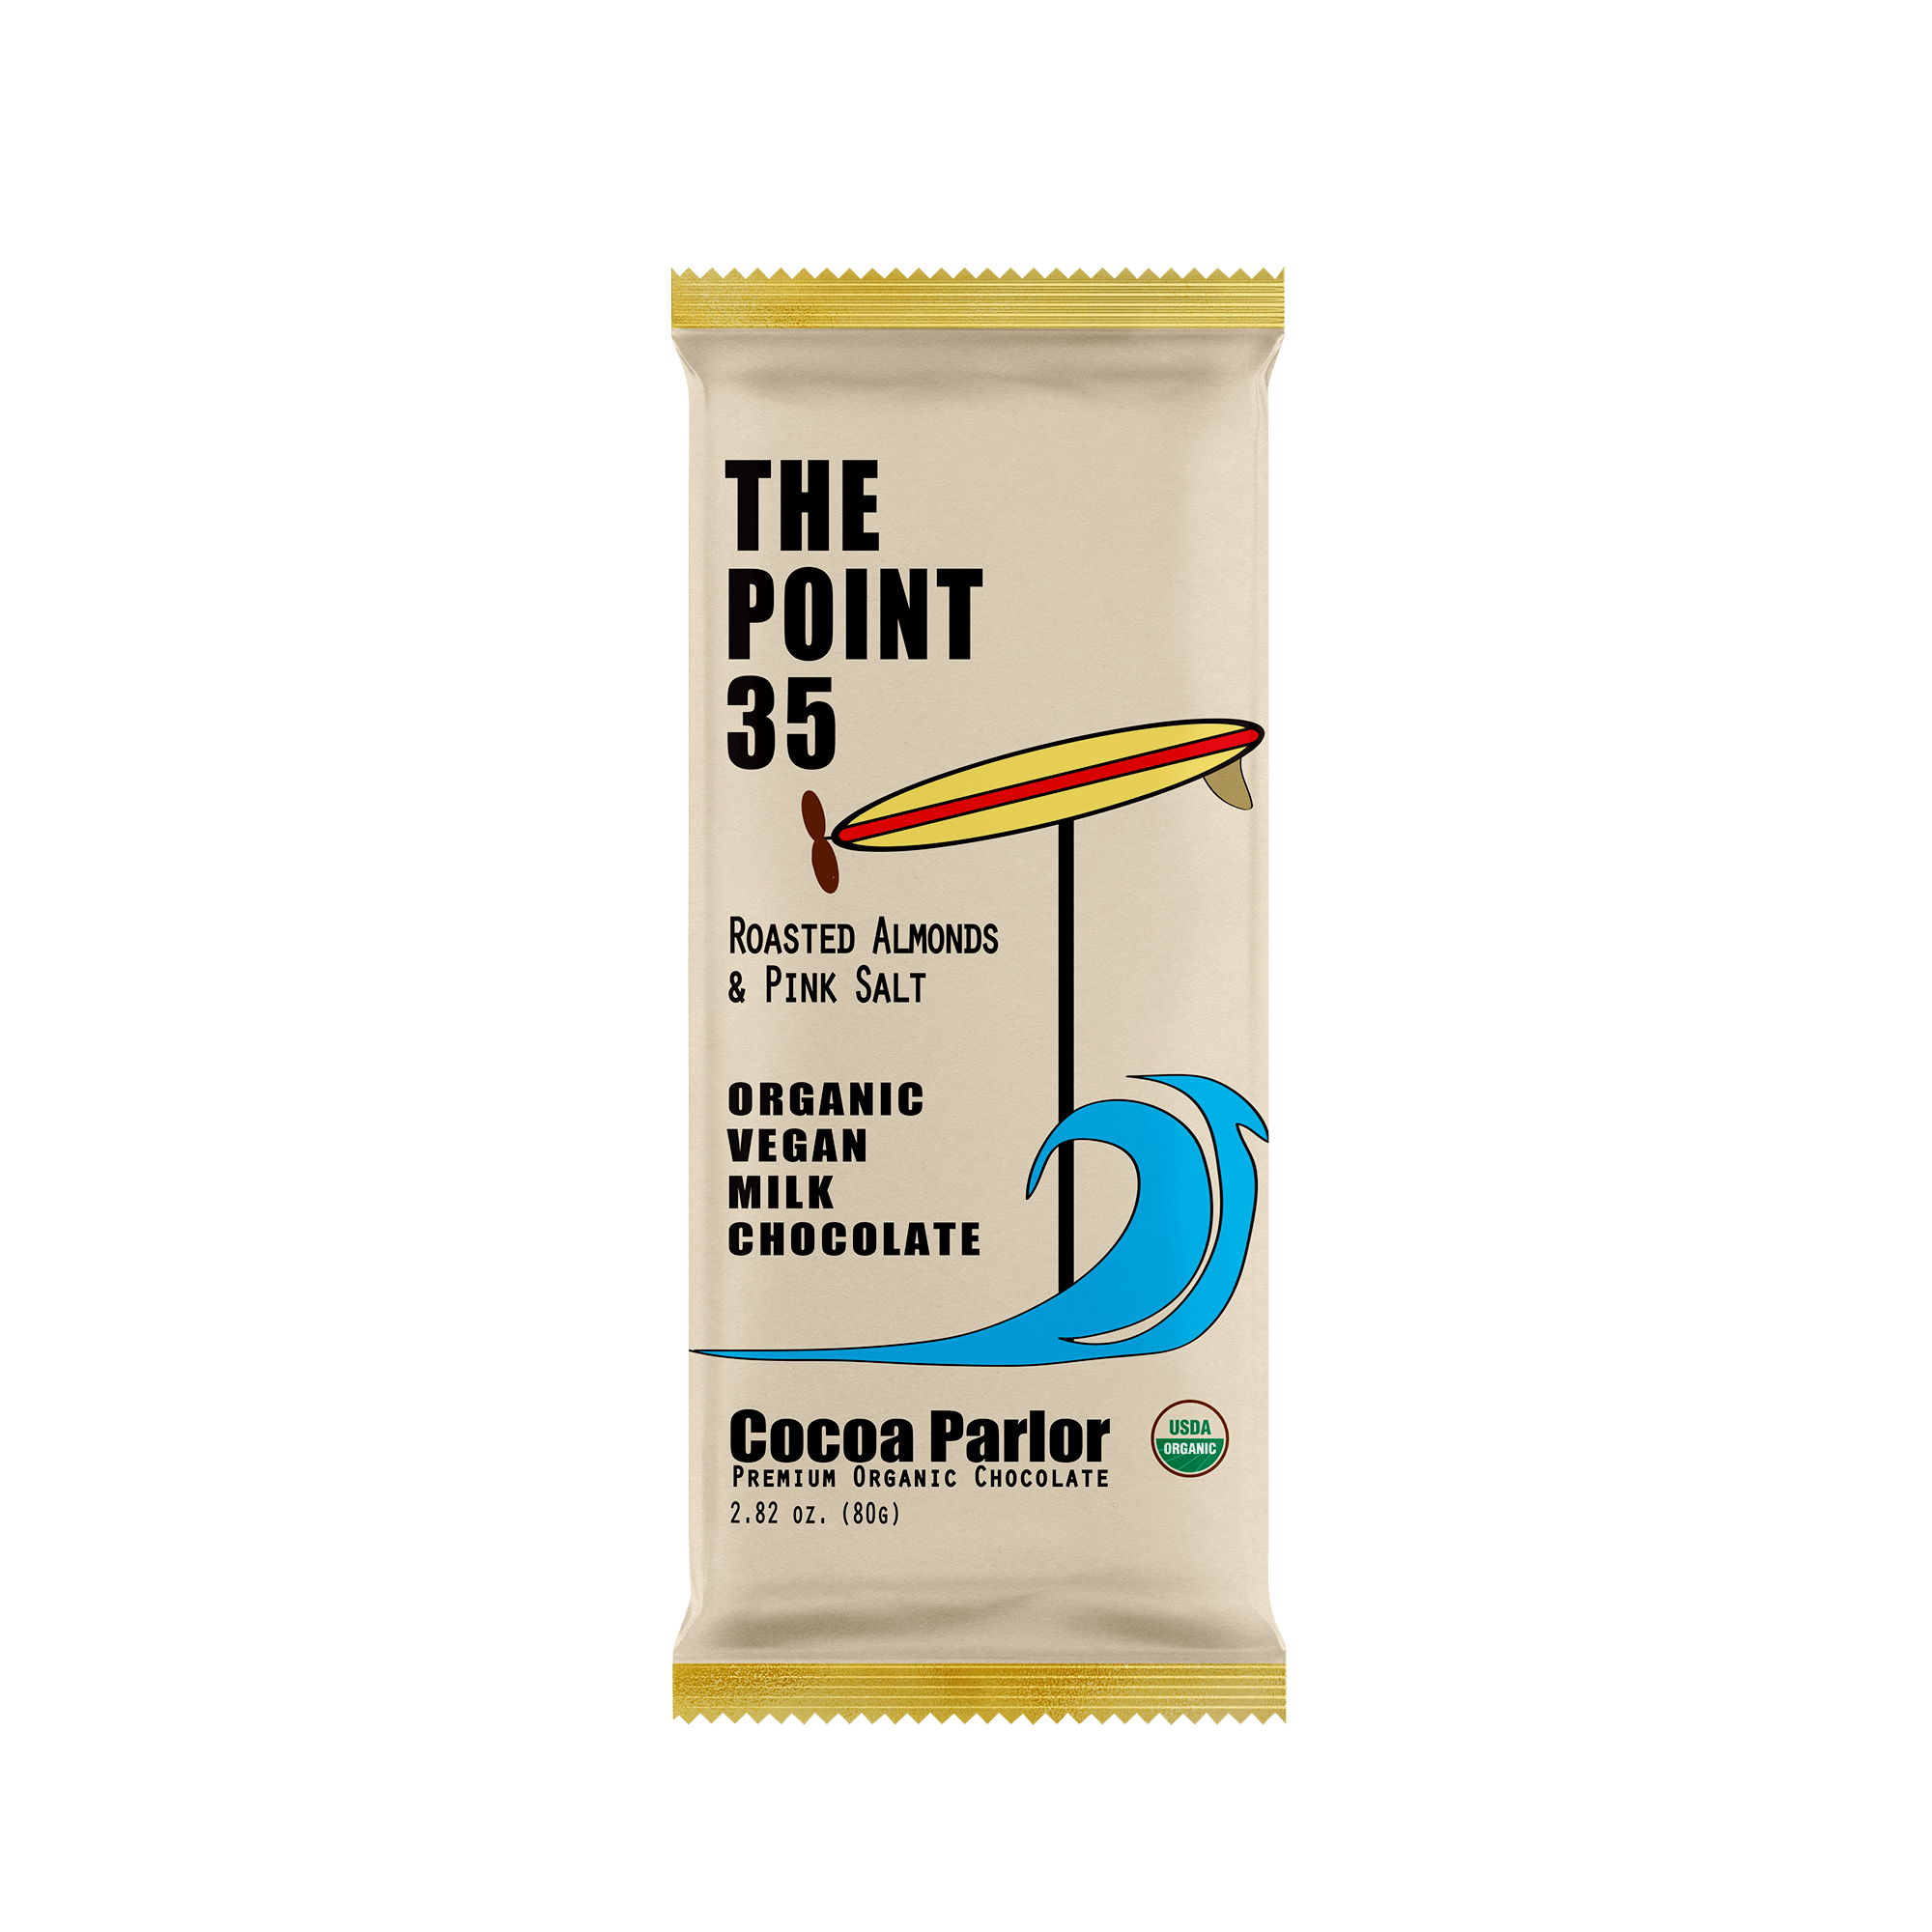 The Point 35